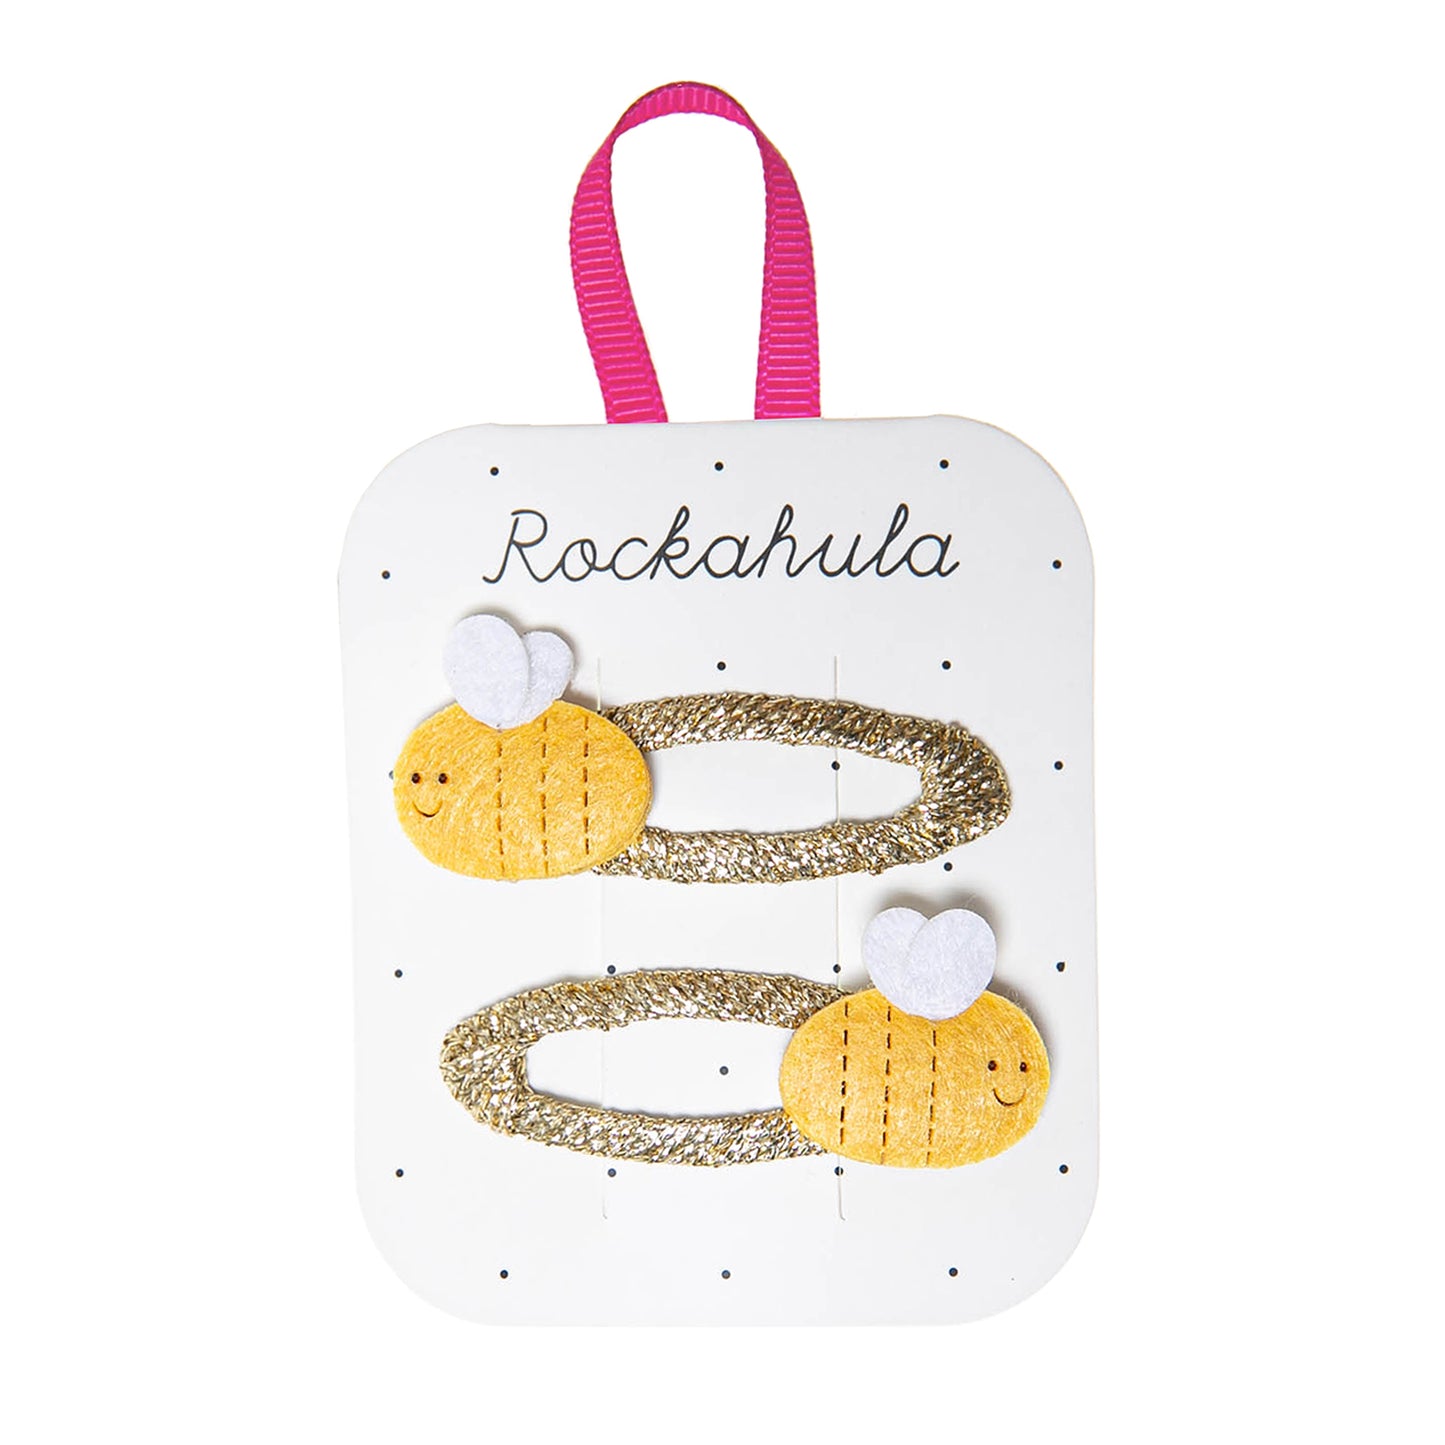 Bumble bee hair clips from Rockahula